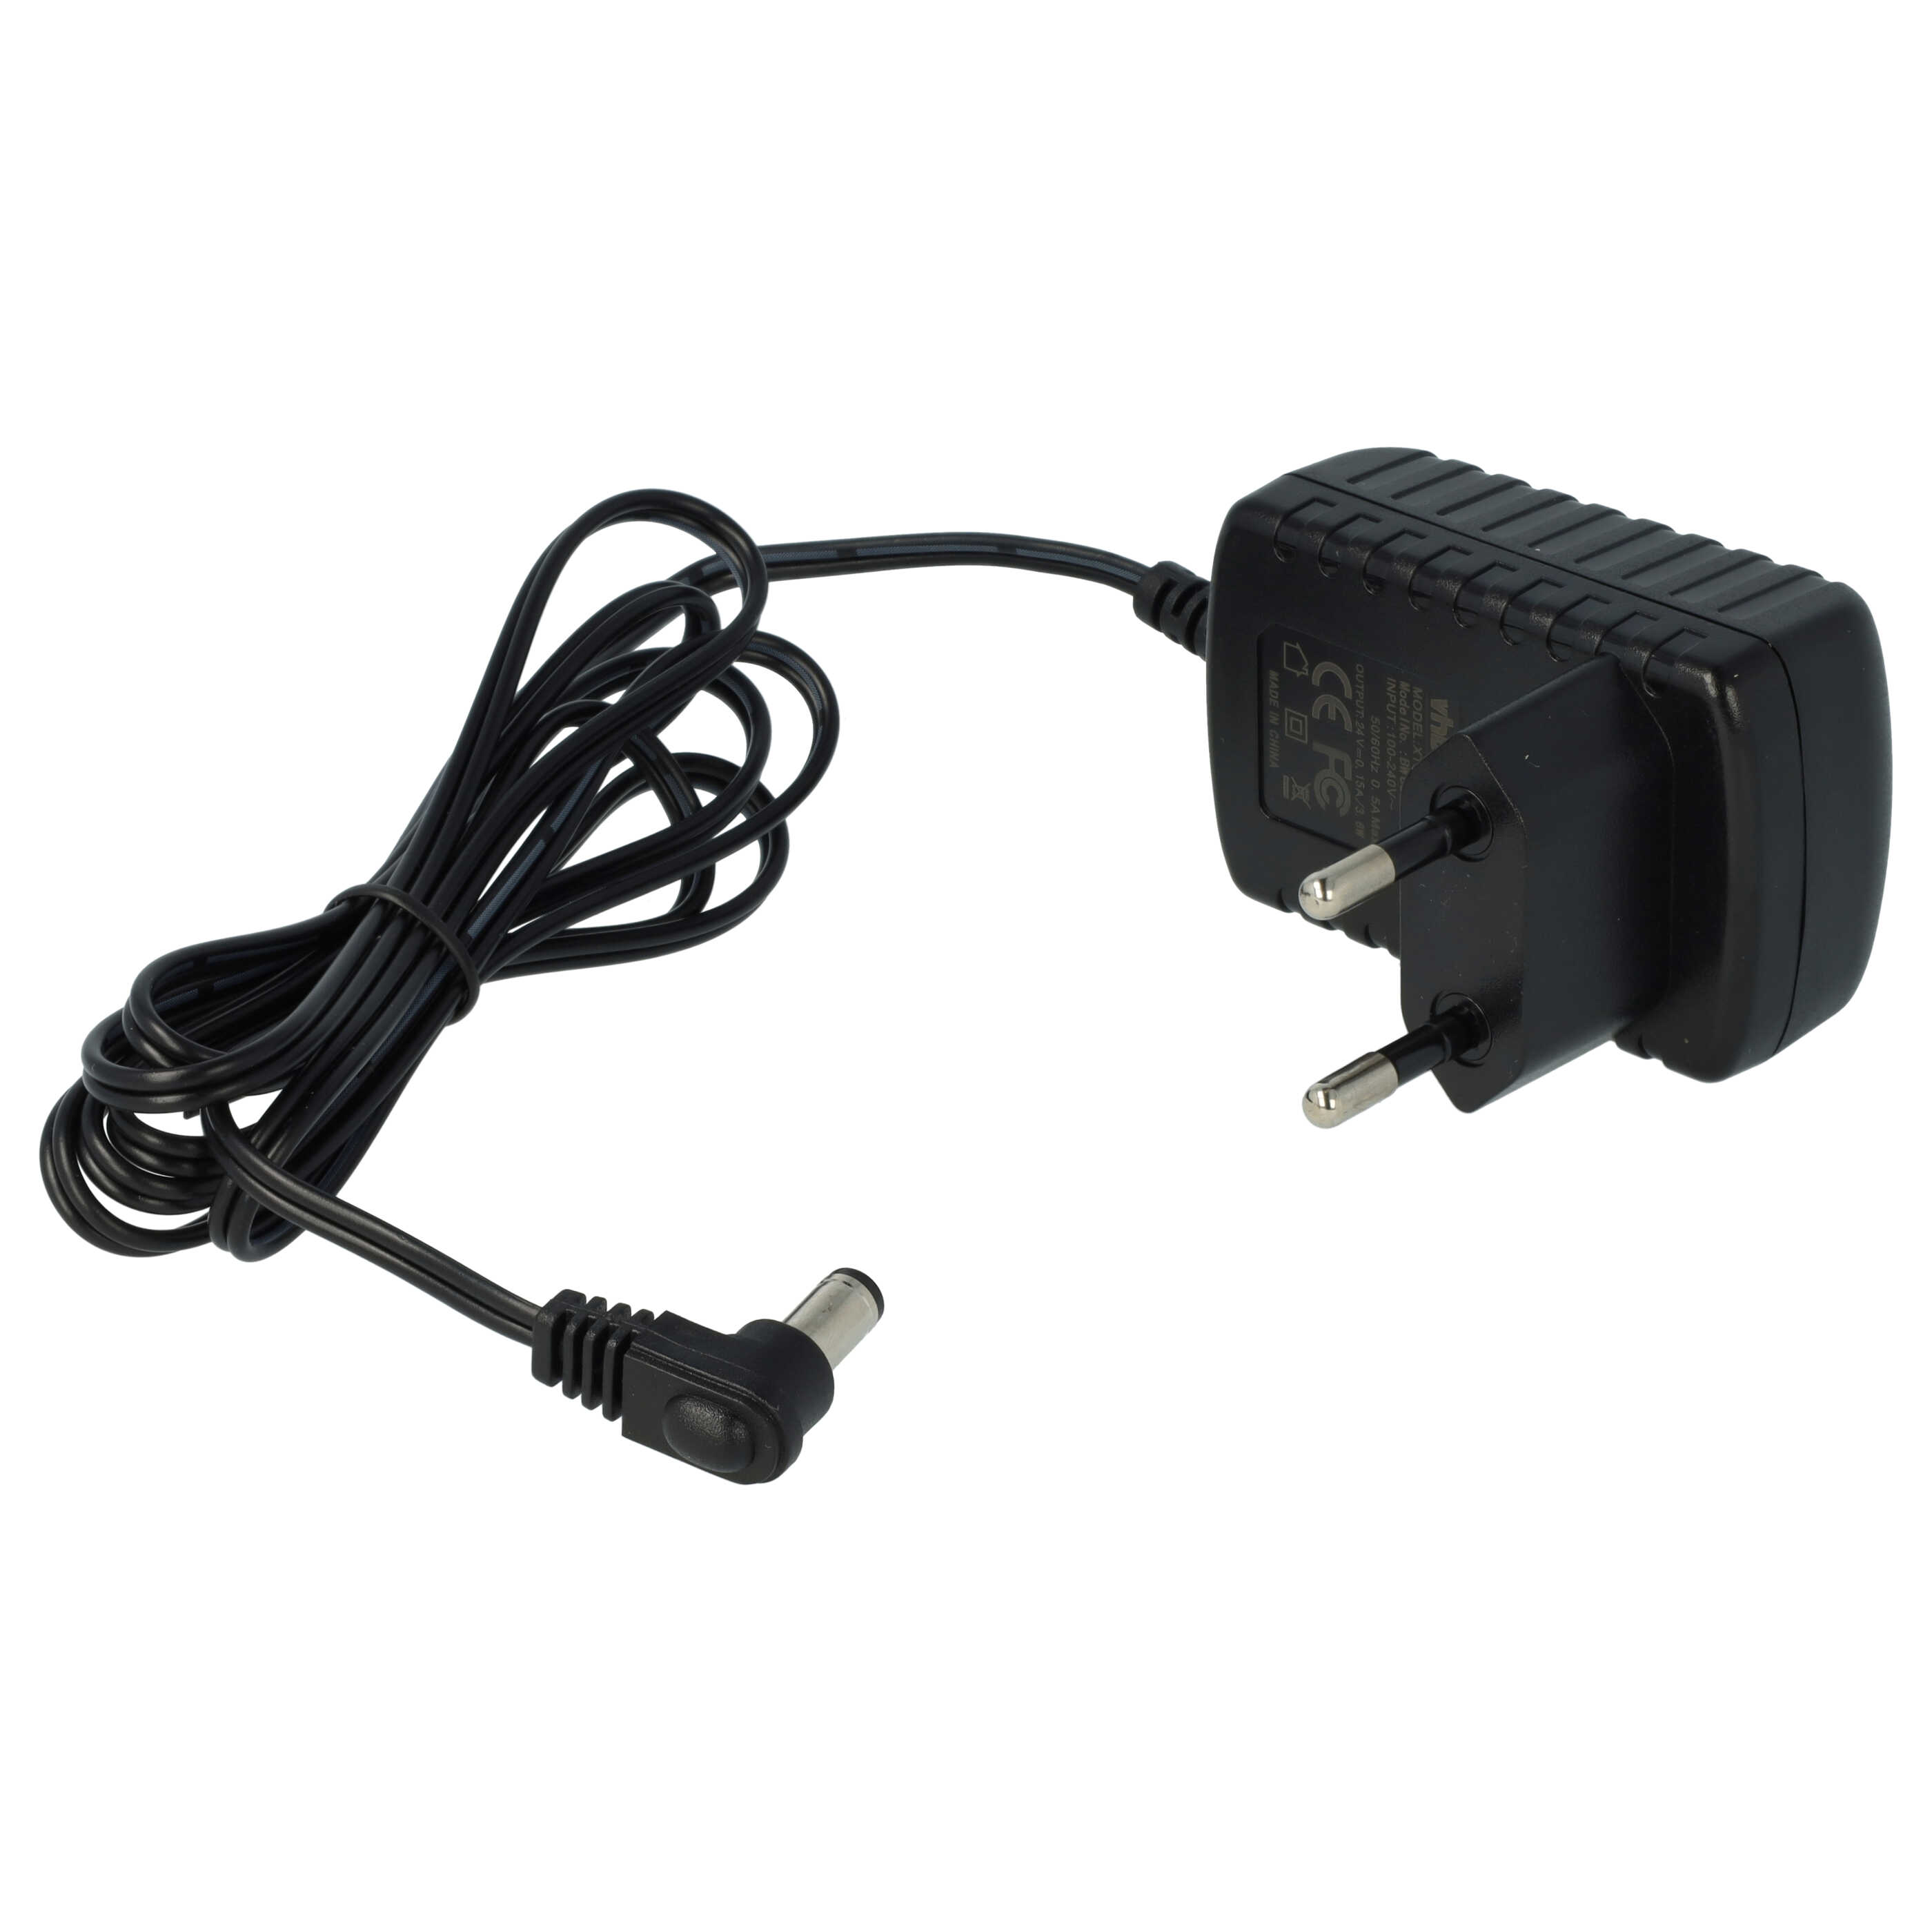 Charger replaces AEG/Electrolux 1183447018 for Electrolux Handheld, Cordless Vacuum Cleaner etc.